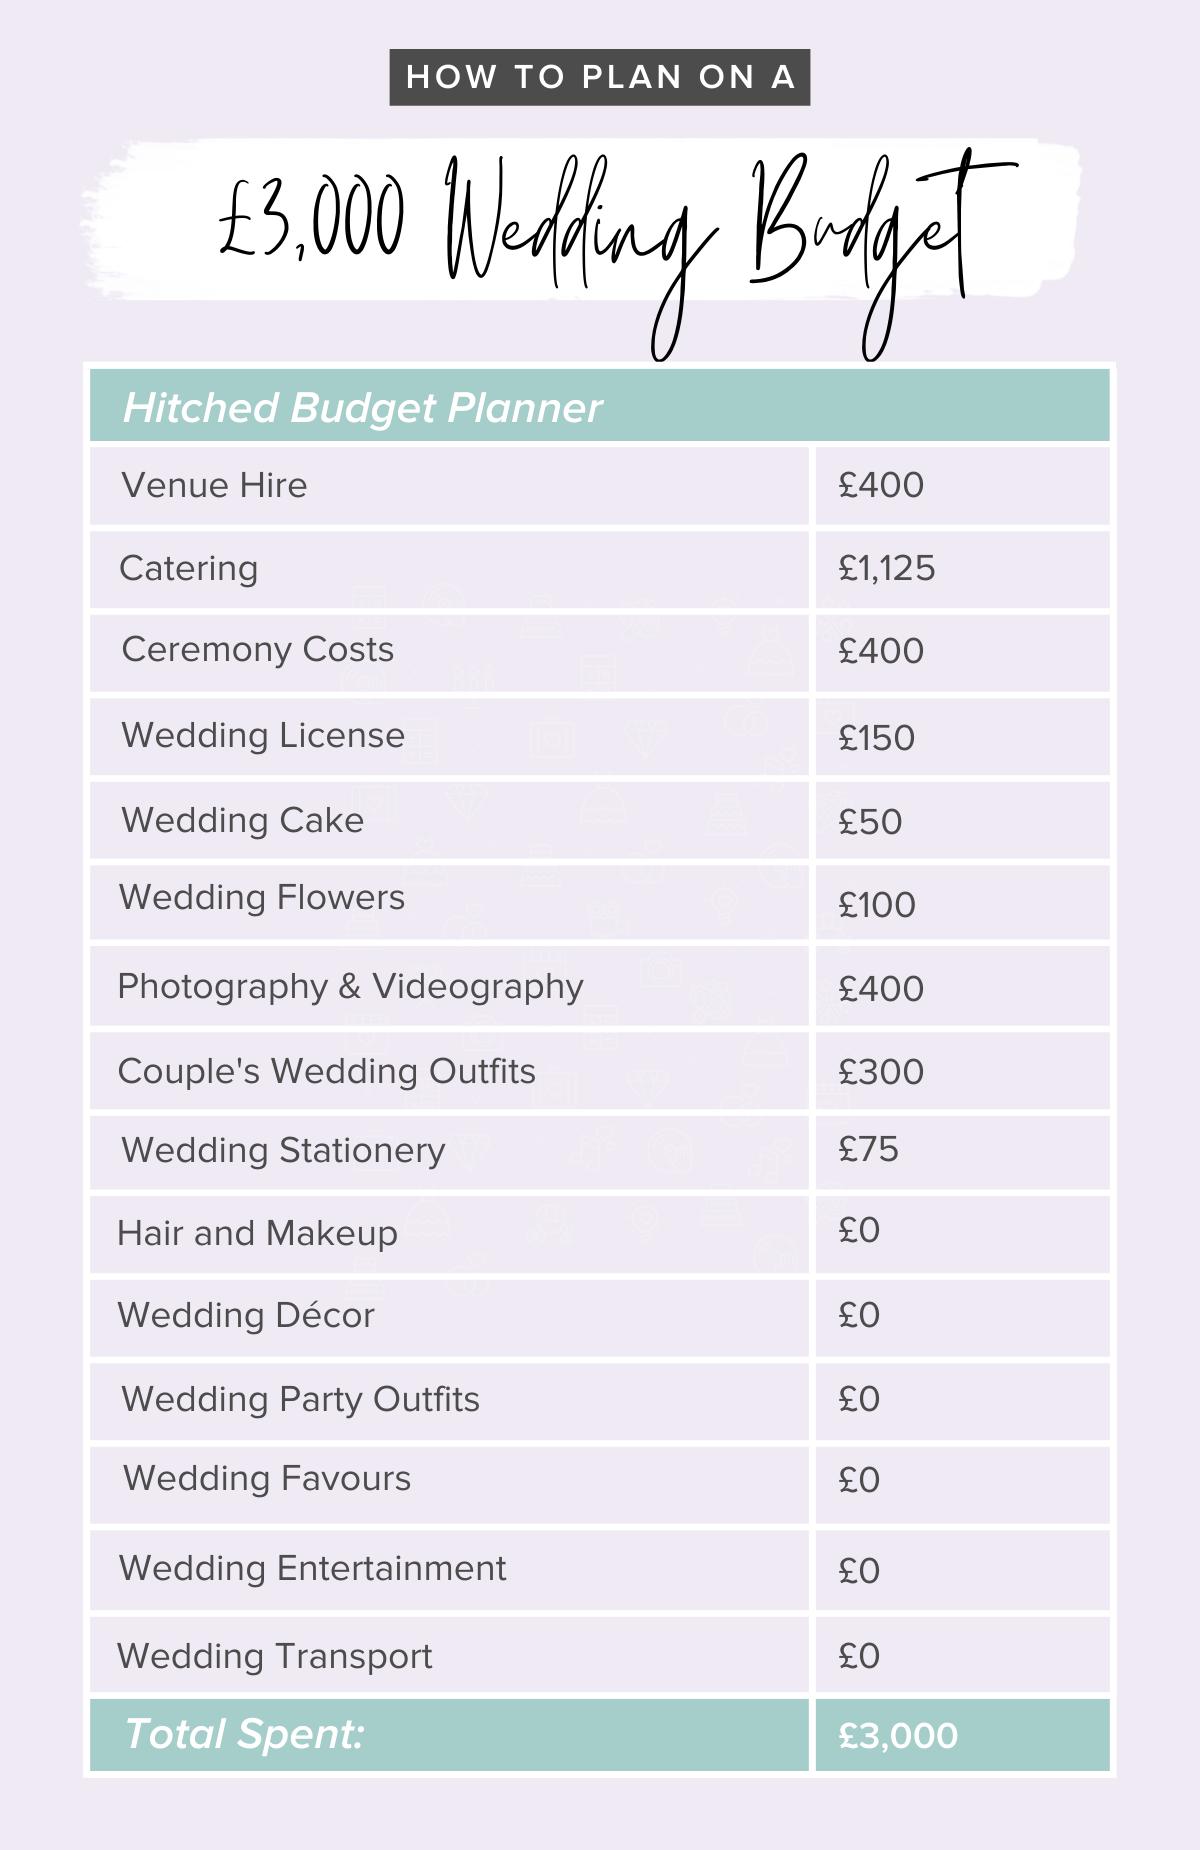 How to plan a wedding on a budget